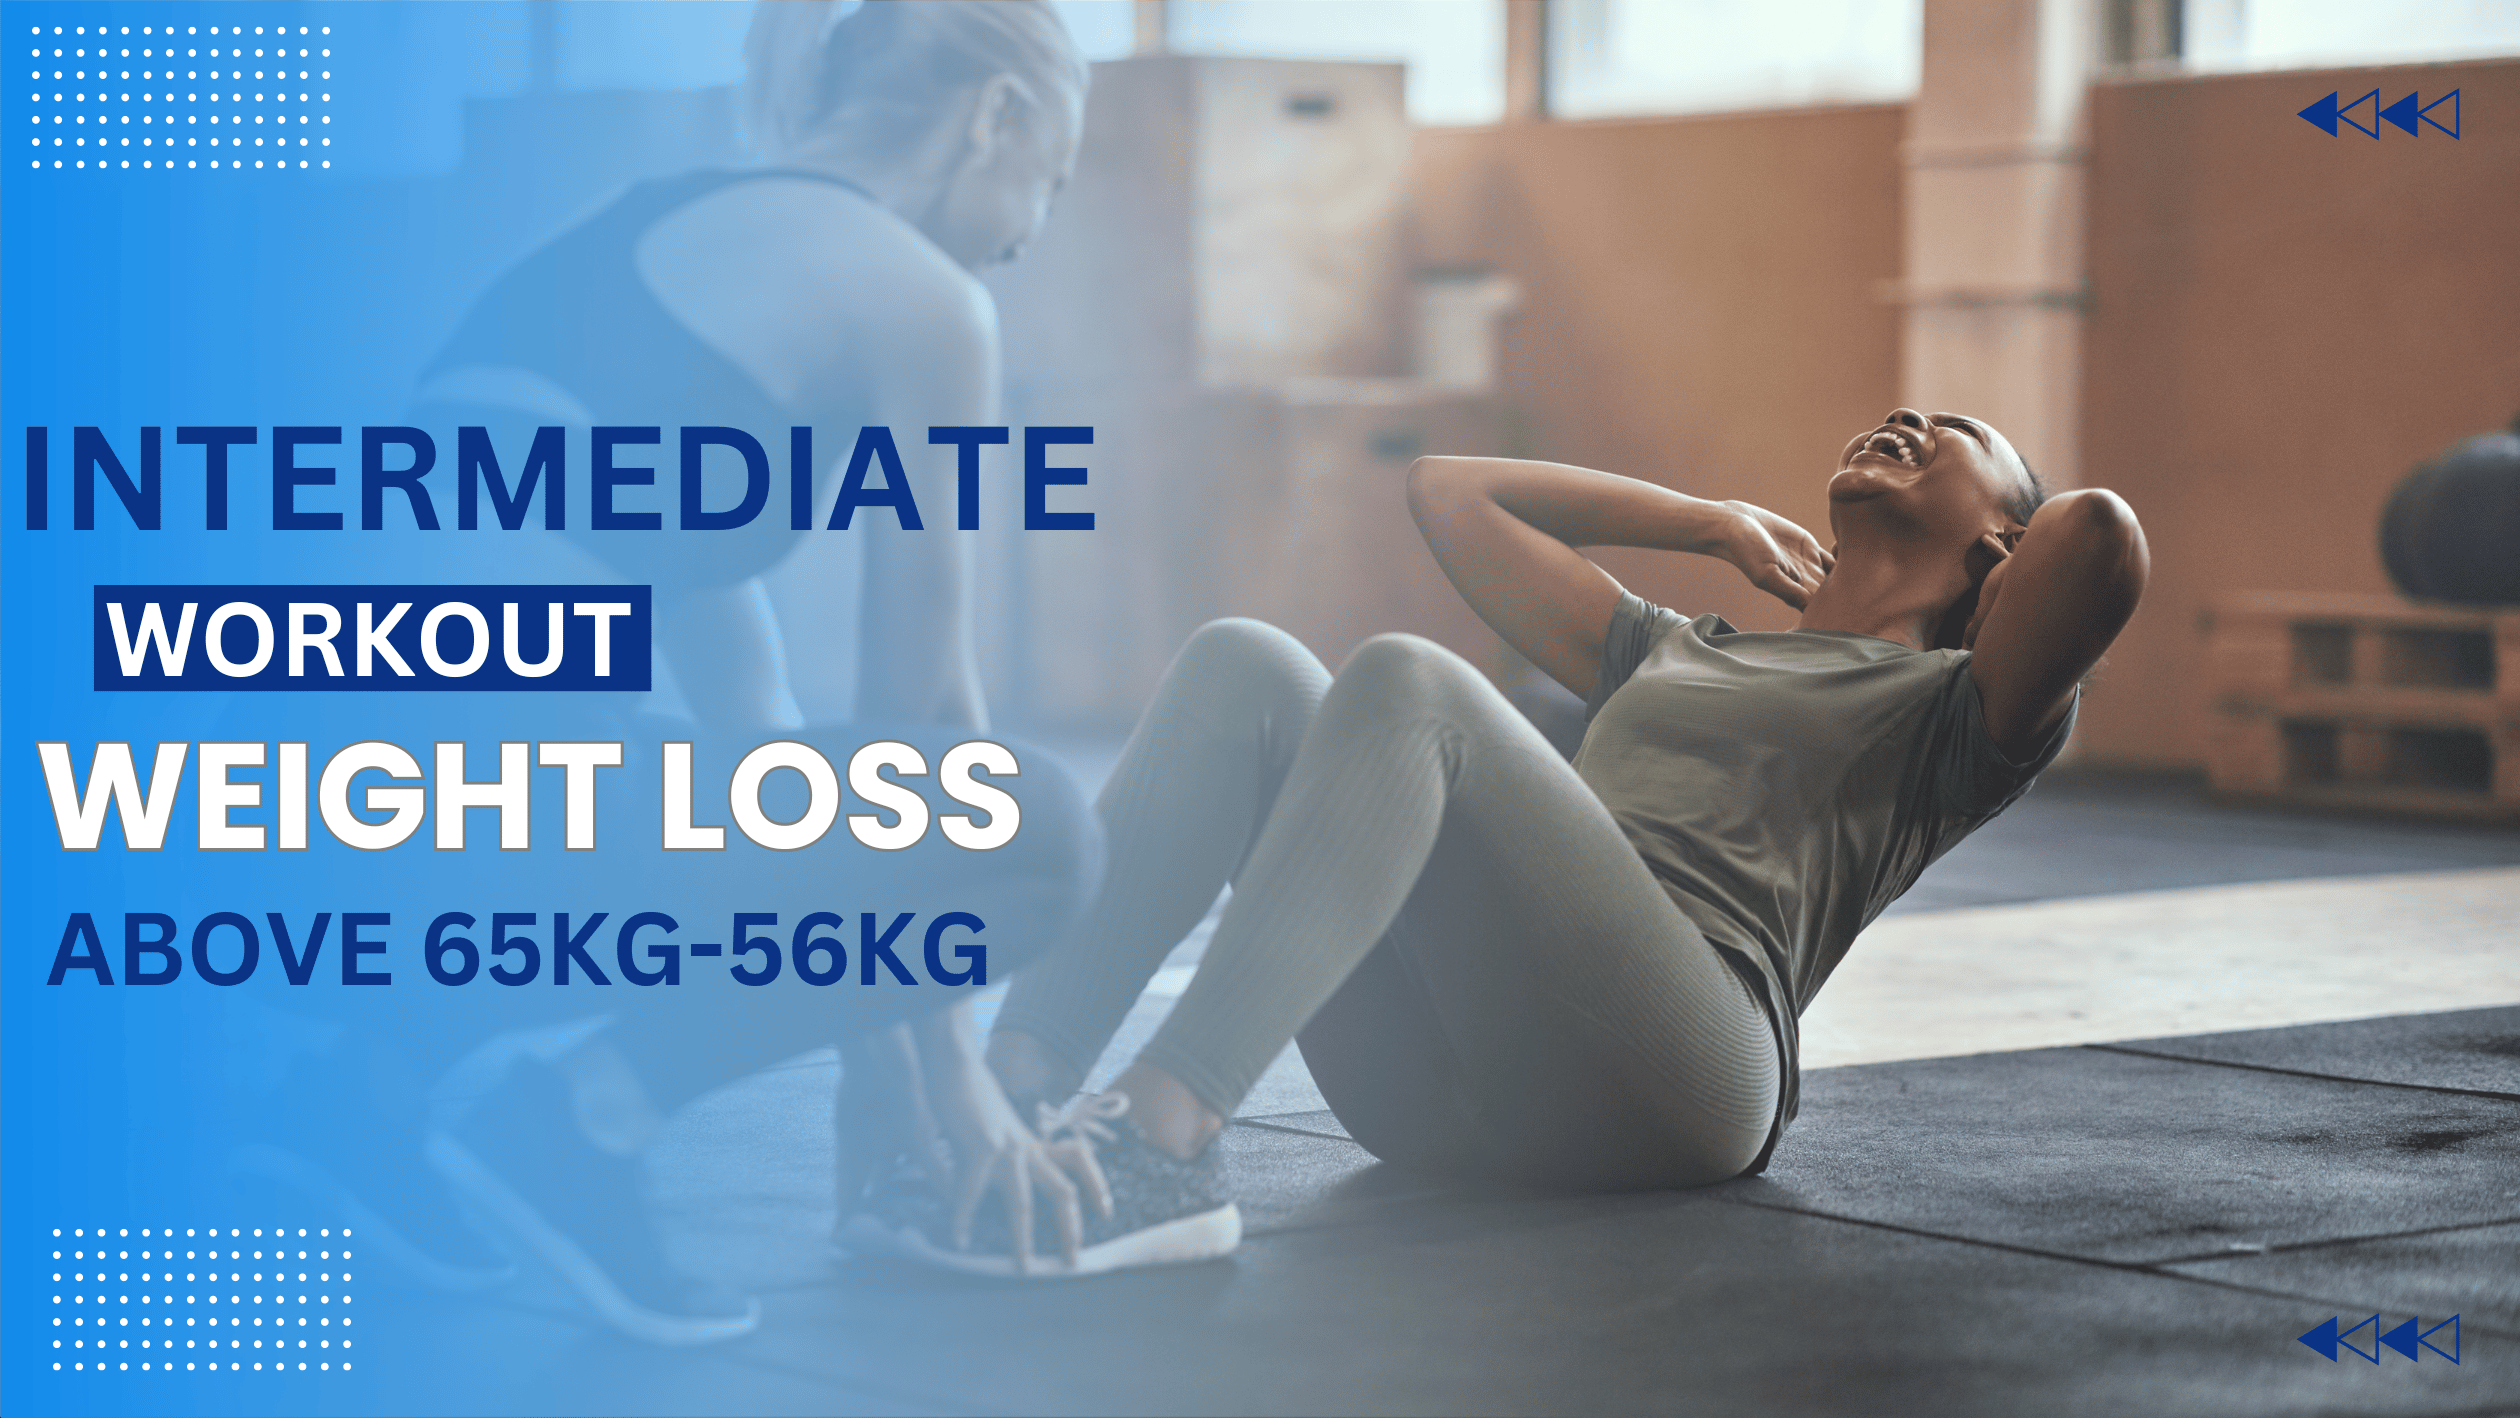 You are currently viewing INTERMEDIATE WEIGHT LOSS WORKOUT PLAN FOR INDIVIDUALS ABOVE 65KG-56KG PEOPLE